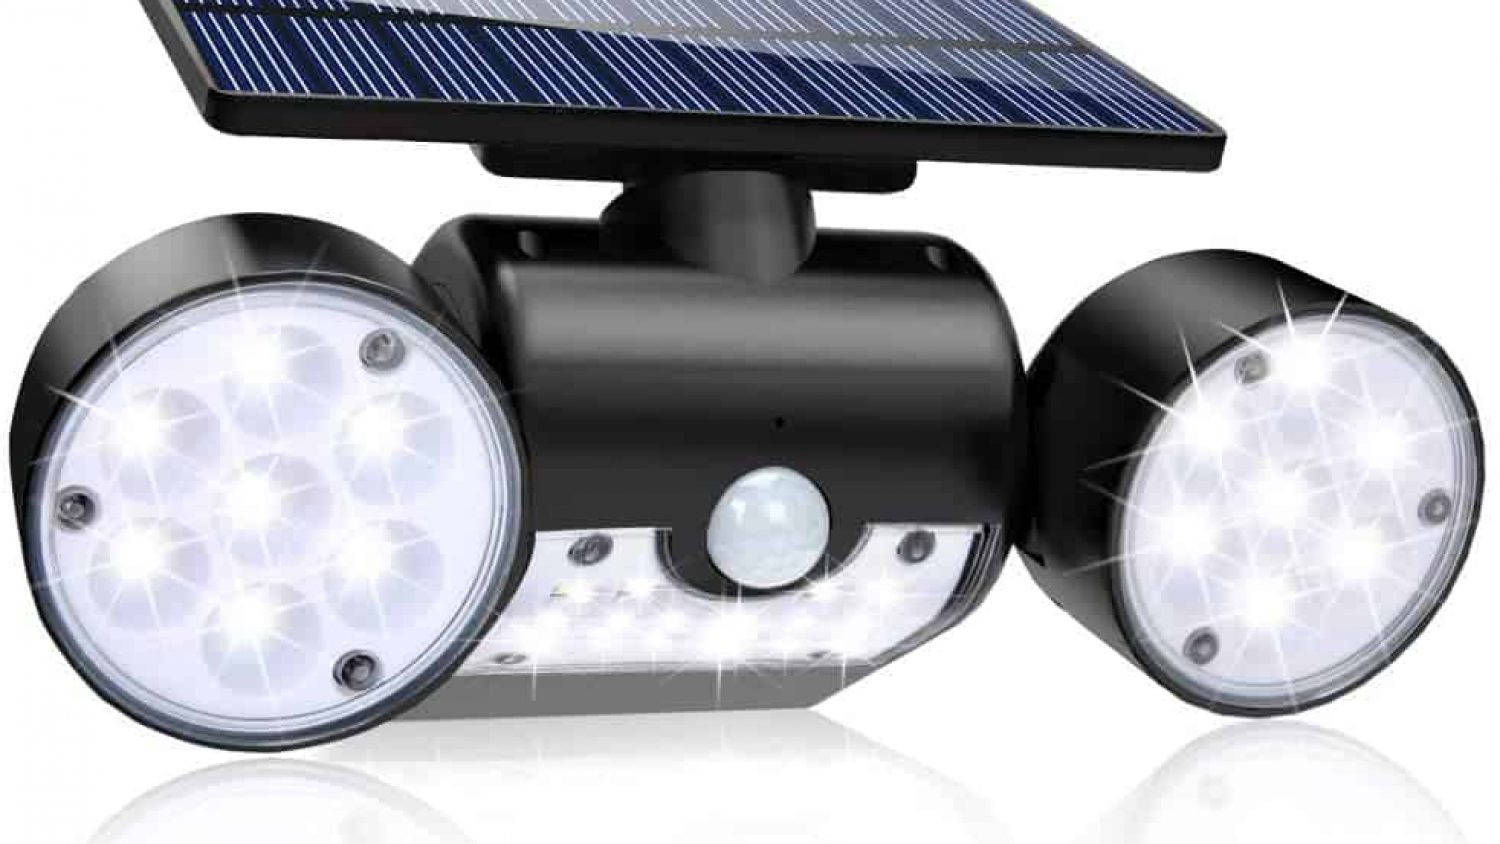 Best Solar Security Light to Keep You Safe at Night